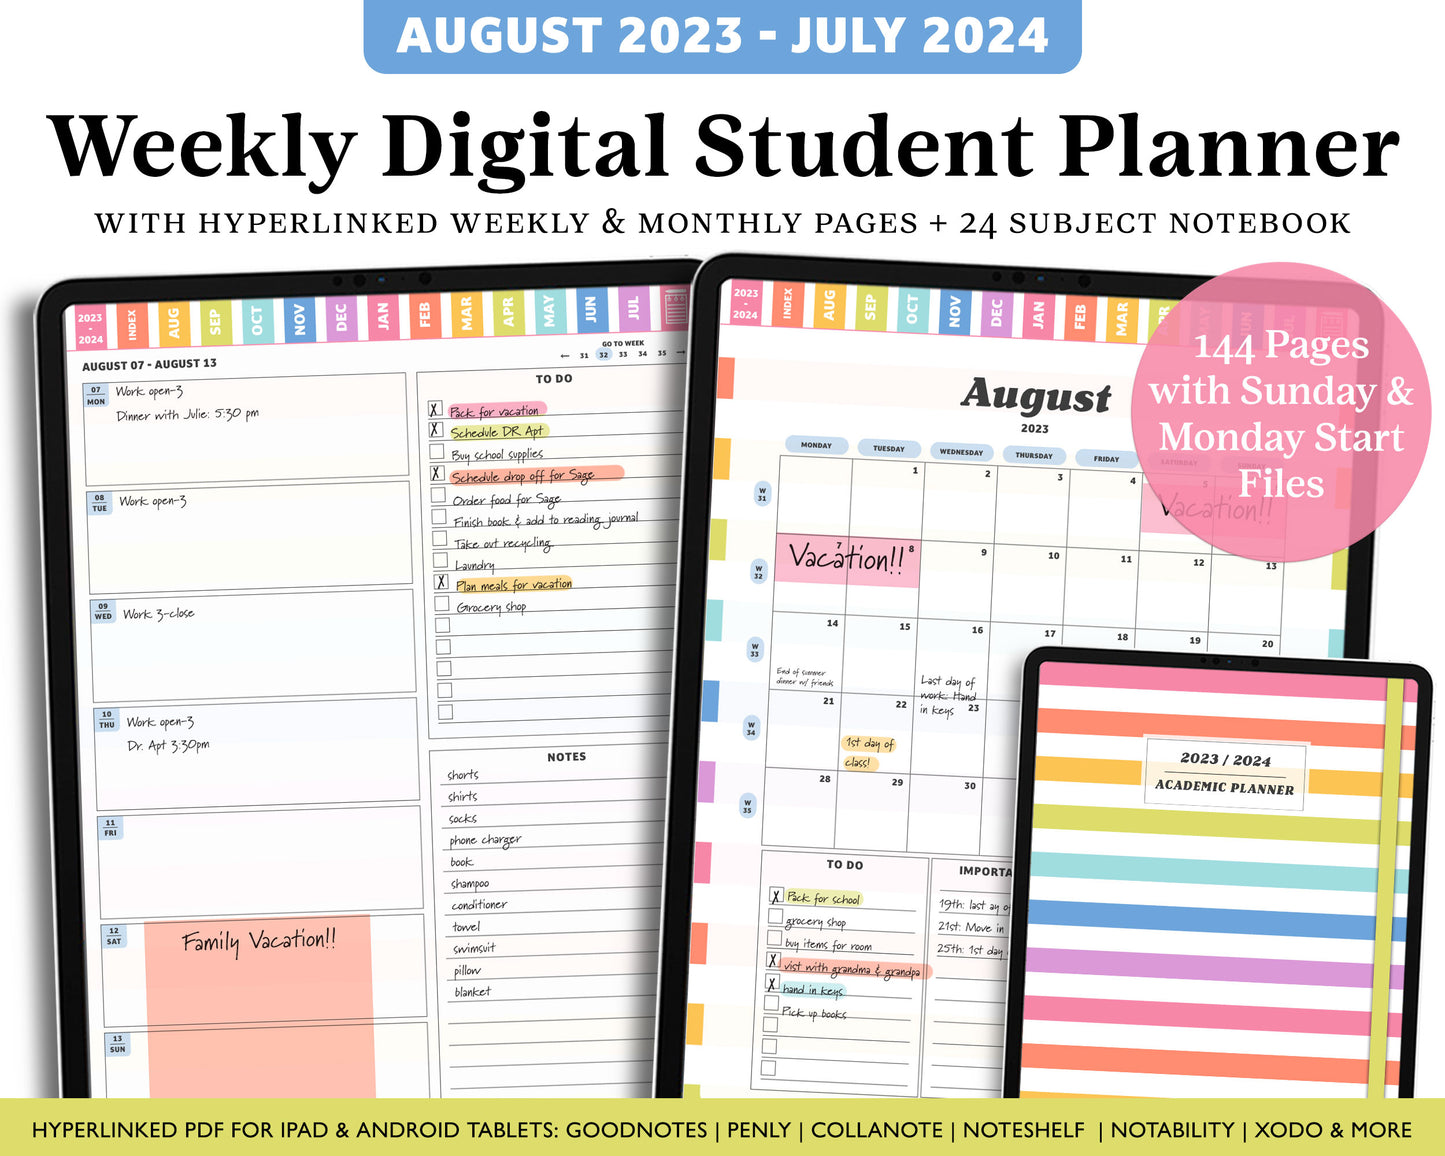 2023 - 2024 Digital Student Planner - Playful Academic Collection